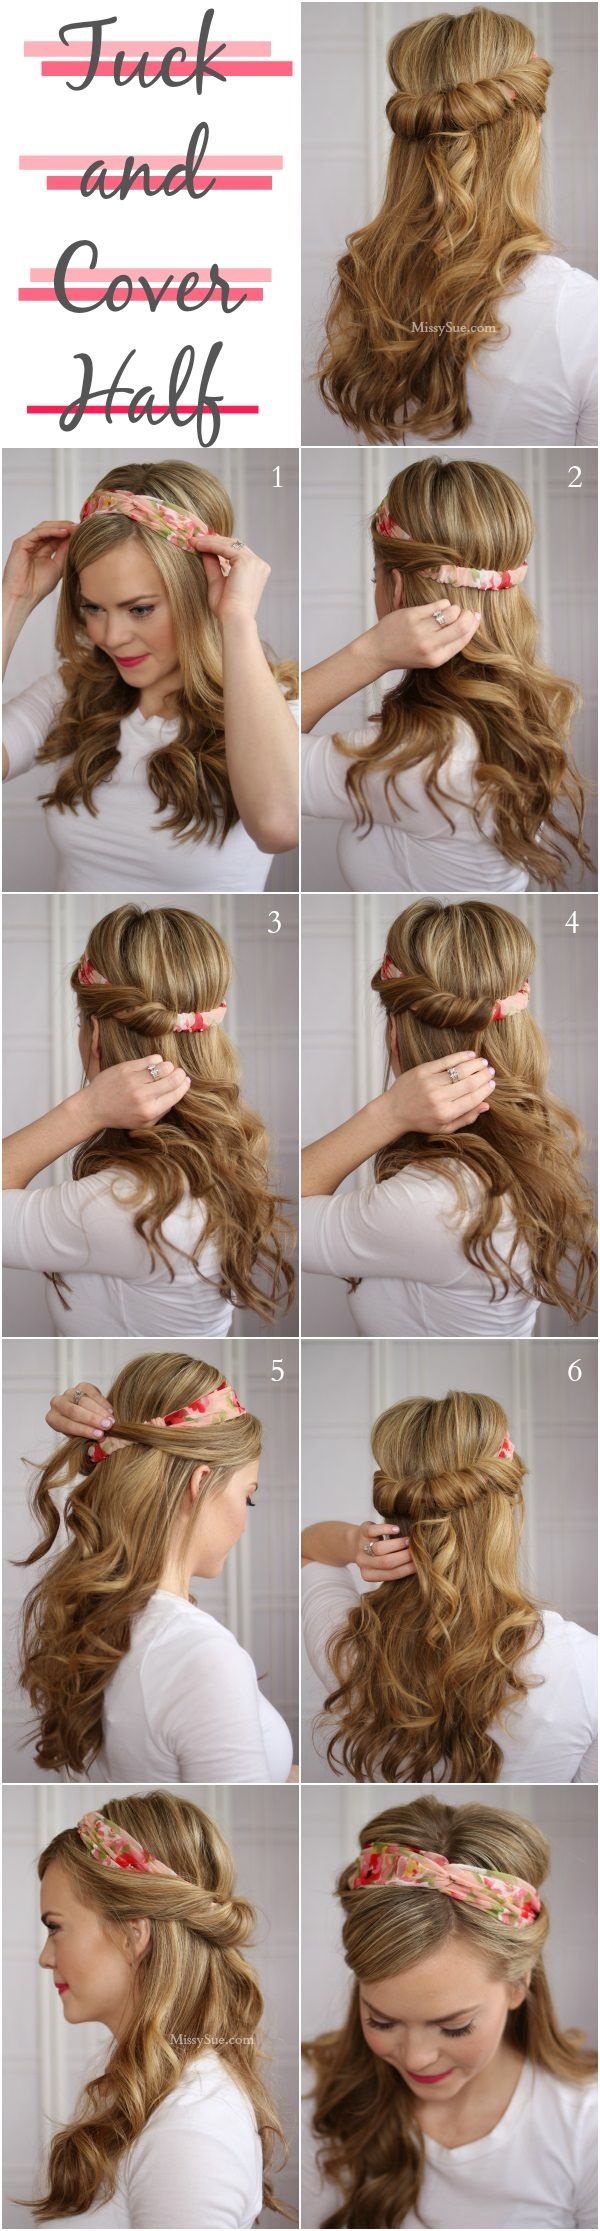 Simple Five Minute Hairstyles (42)